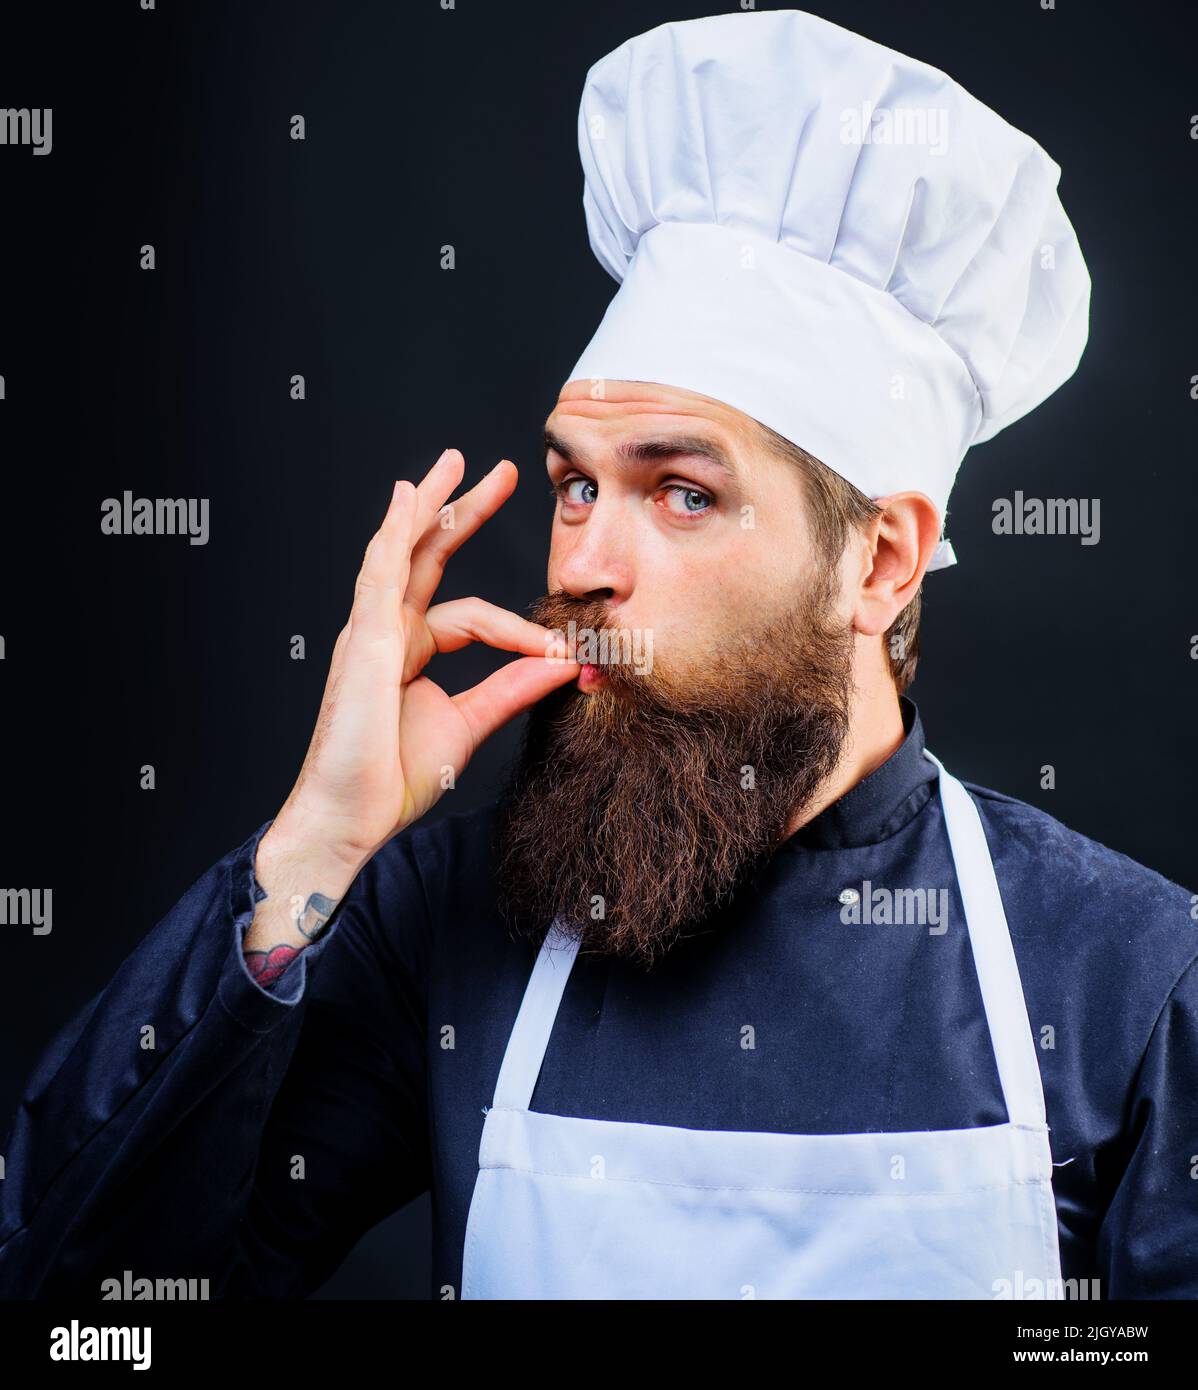 Male chef or baker in white hat and apron gesturing excellent. Cook with taste approval gesture. Stock Photo